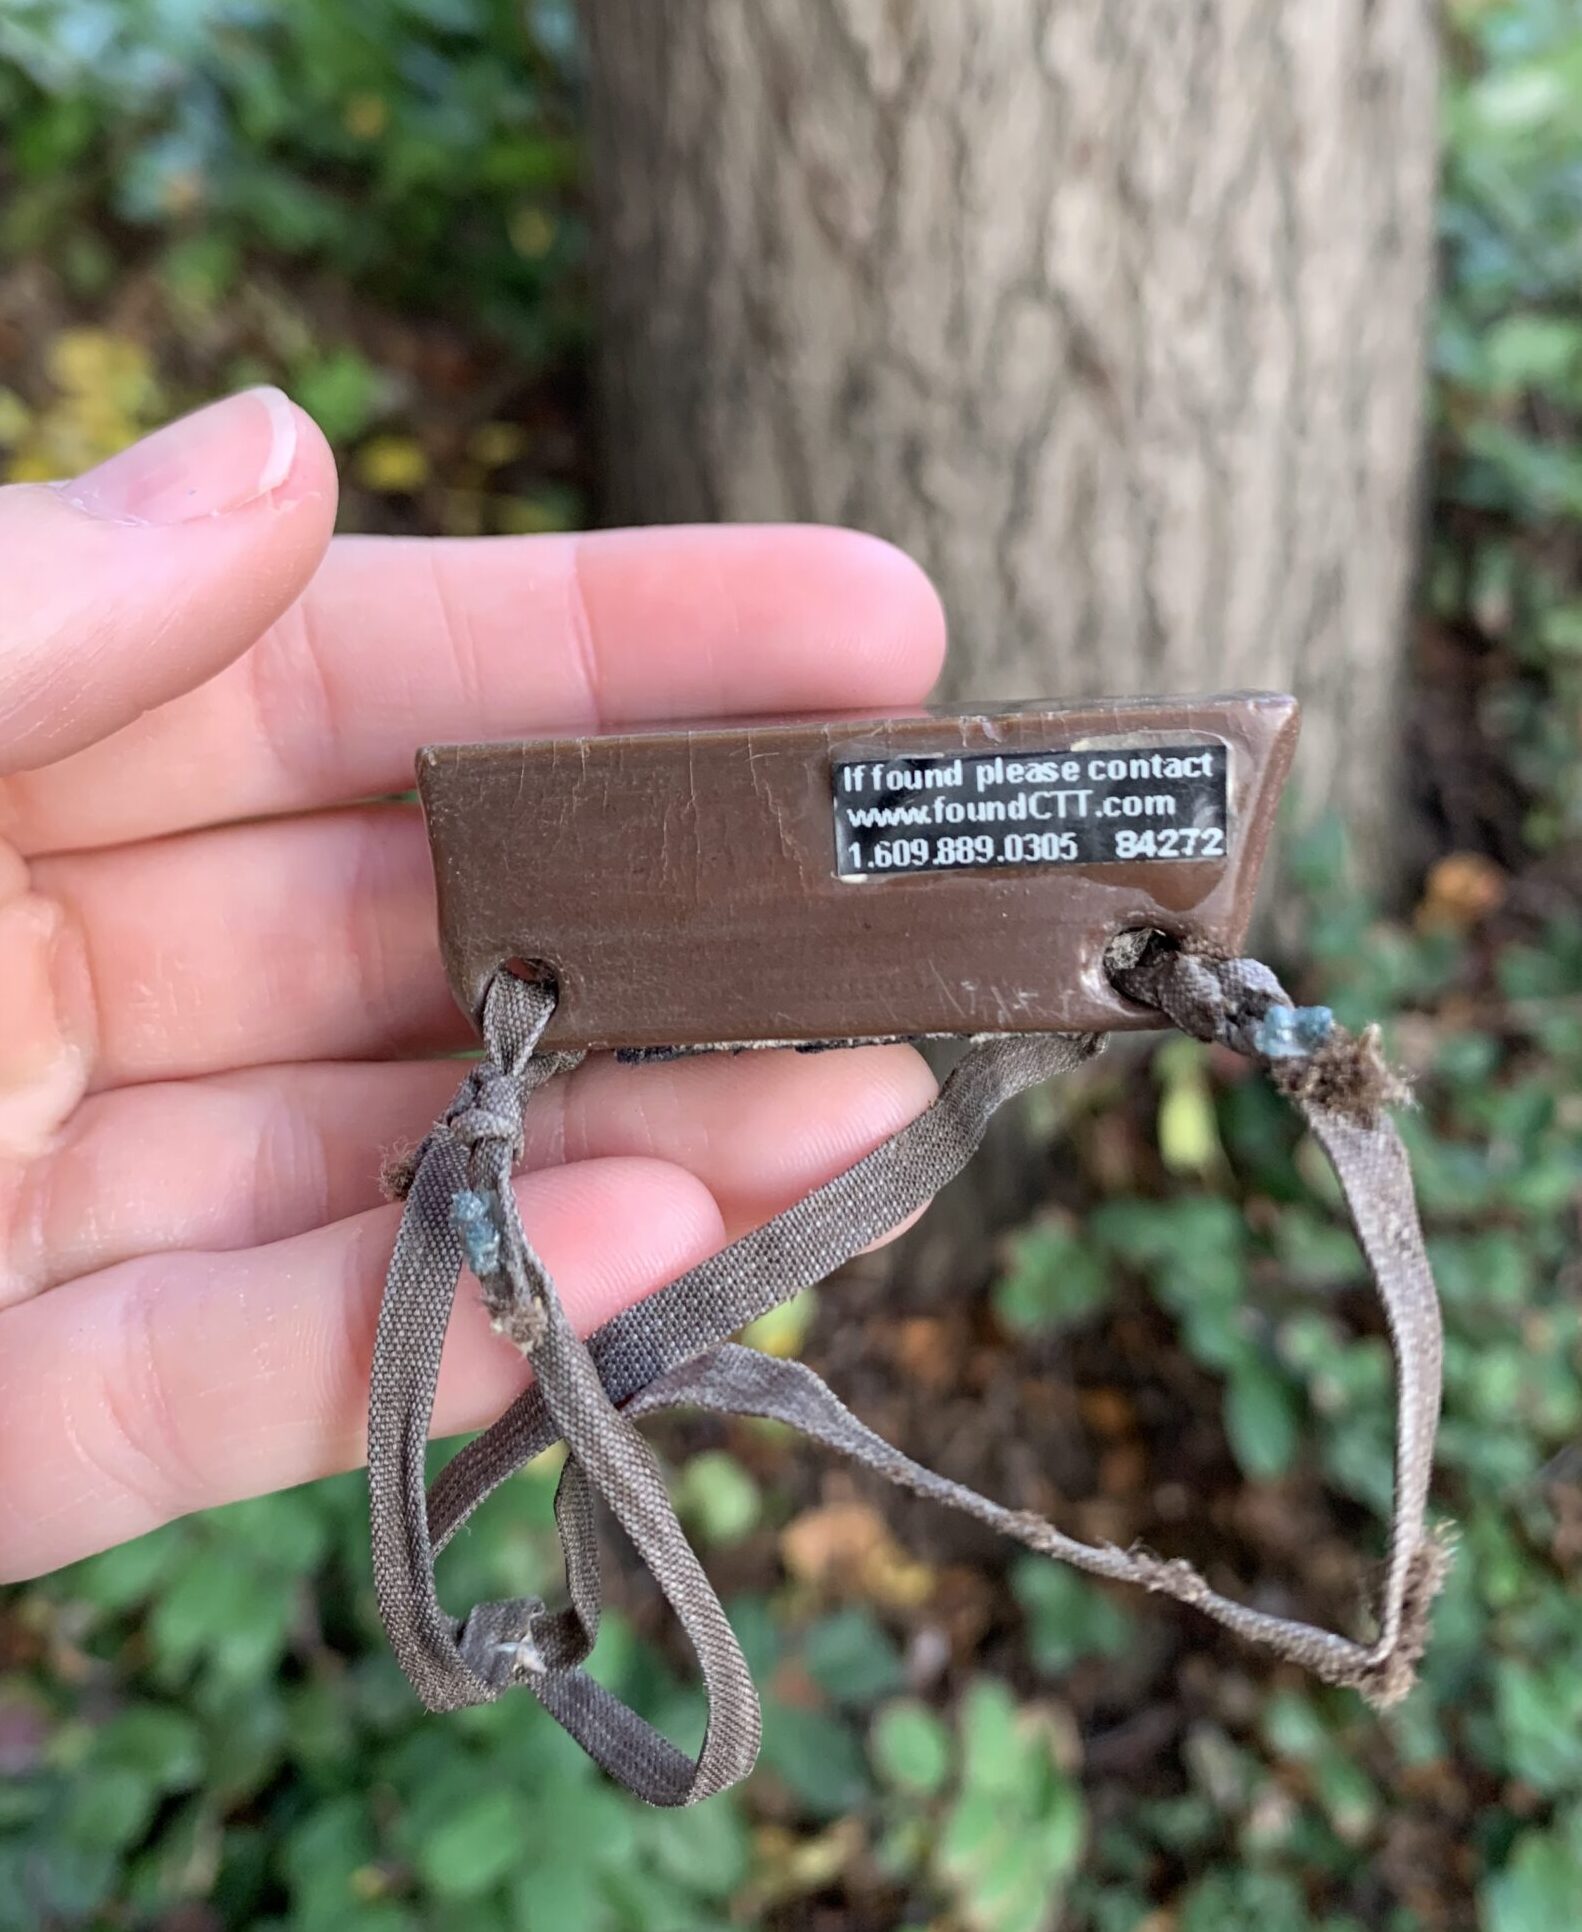 a small brown rectangular transmitter. The brown neoprene straps are worn and frayed after use. The transmitter is dusty from laying on the ground. a sticker on the side is partly legible and reads: "if found please contact found.ctt.com" and lists a phone number